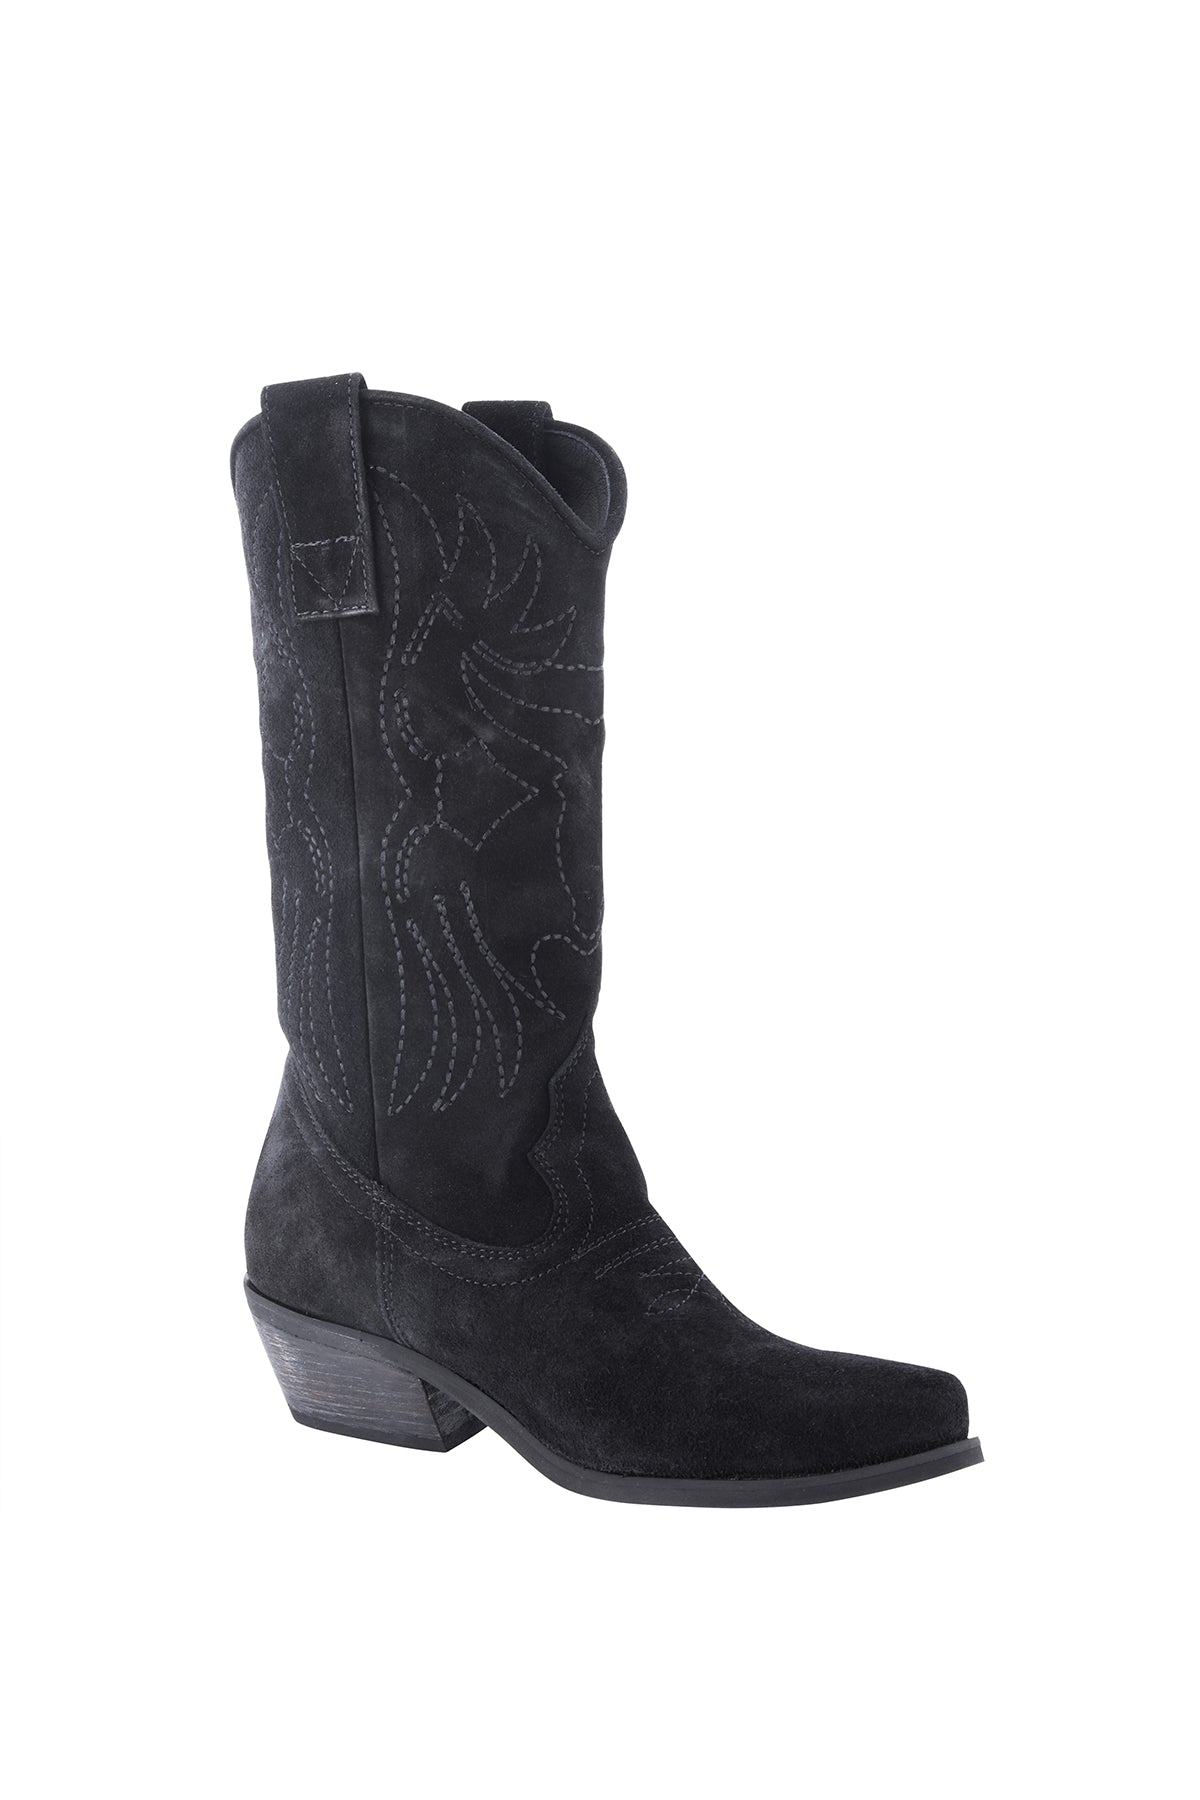 EMBROIDERED BLACK SUEDE BOOT